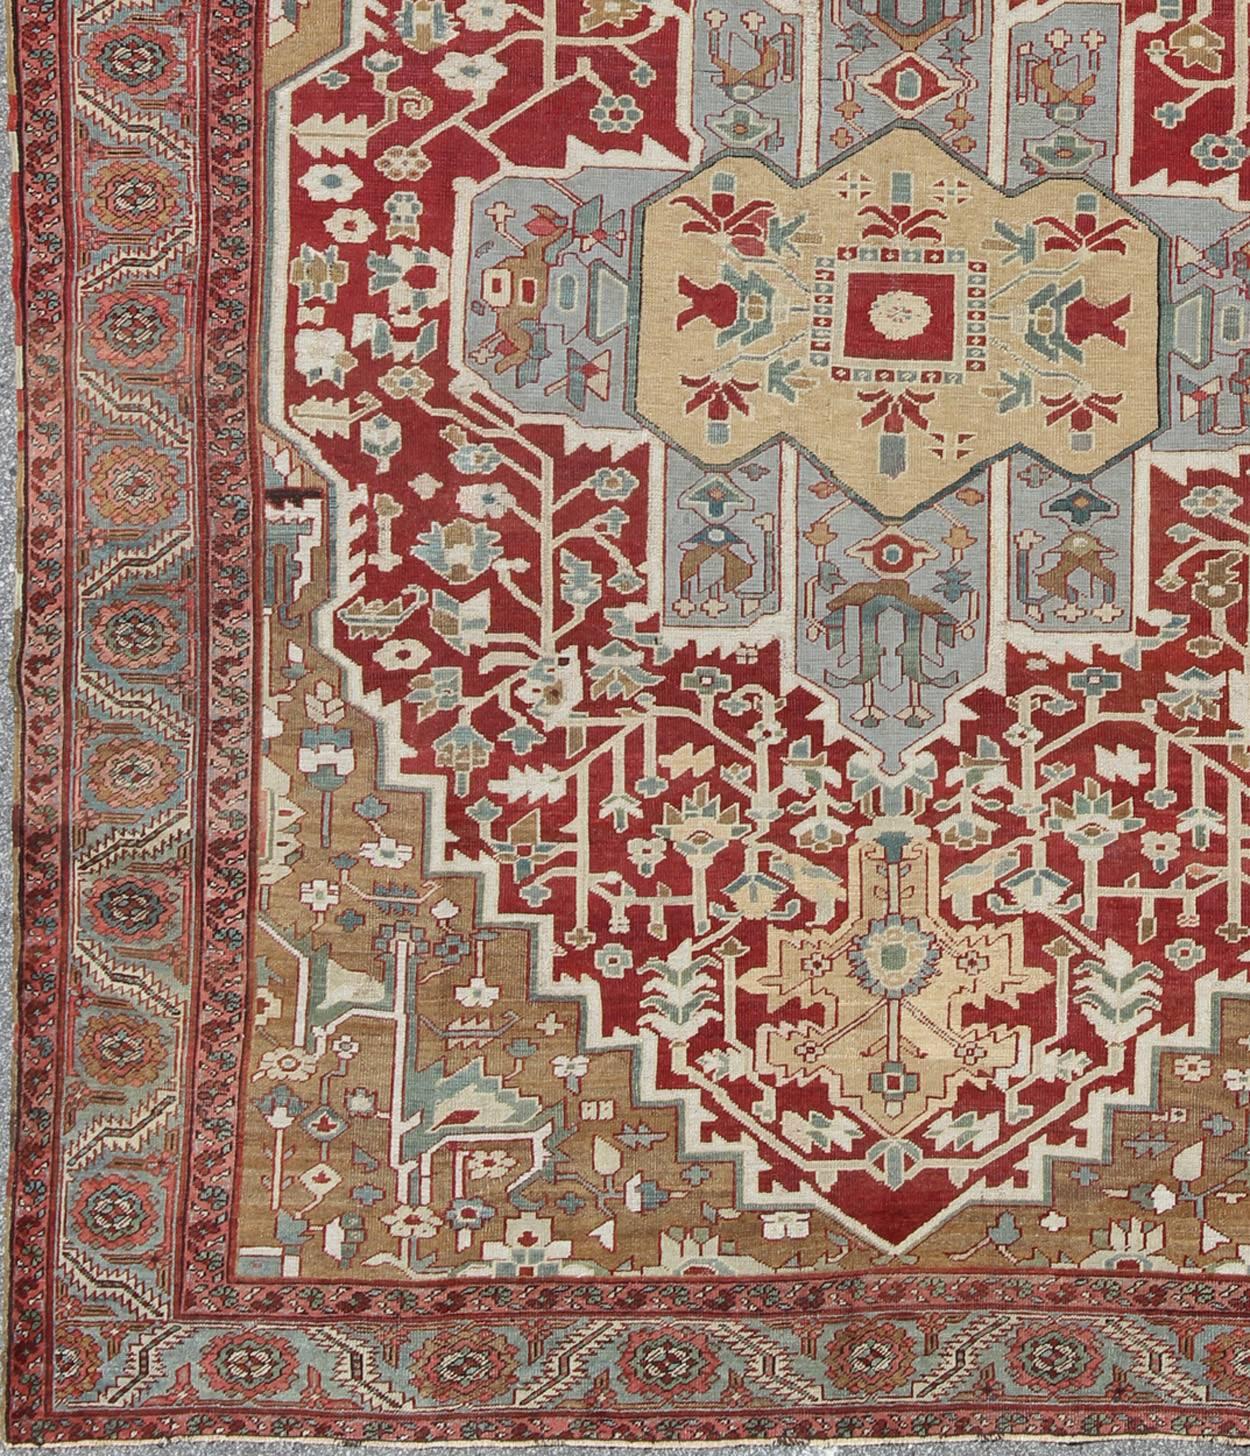 Antique Serapi, rug/C-0601. Antique Bakhshaish Persian rug

Measures: 9'4 x 11'7. 

This spectacular antique Persian Bakshaish/serapi displays a central medallion and geometric design throughout. The medallion contains a variety of geometric